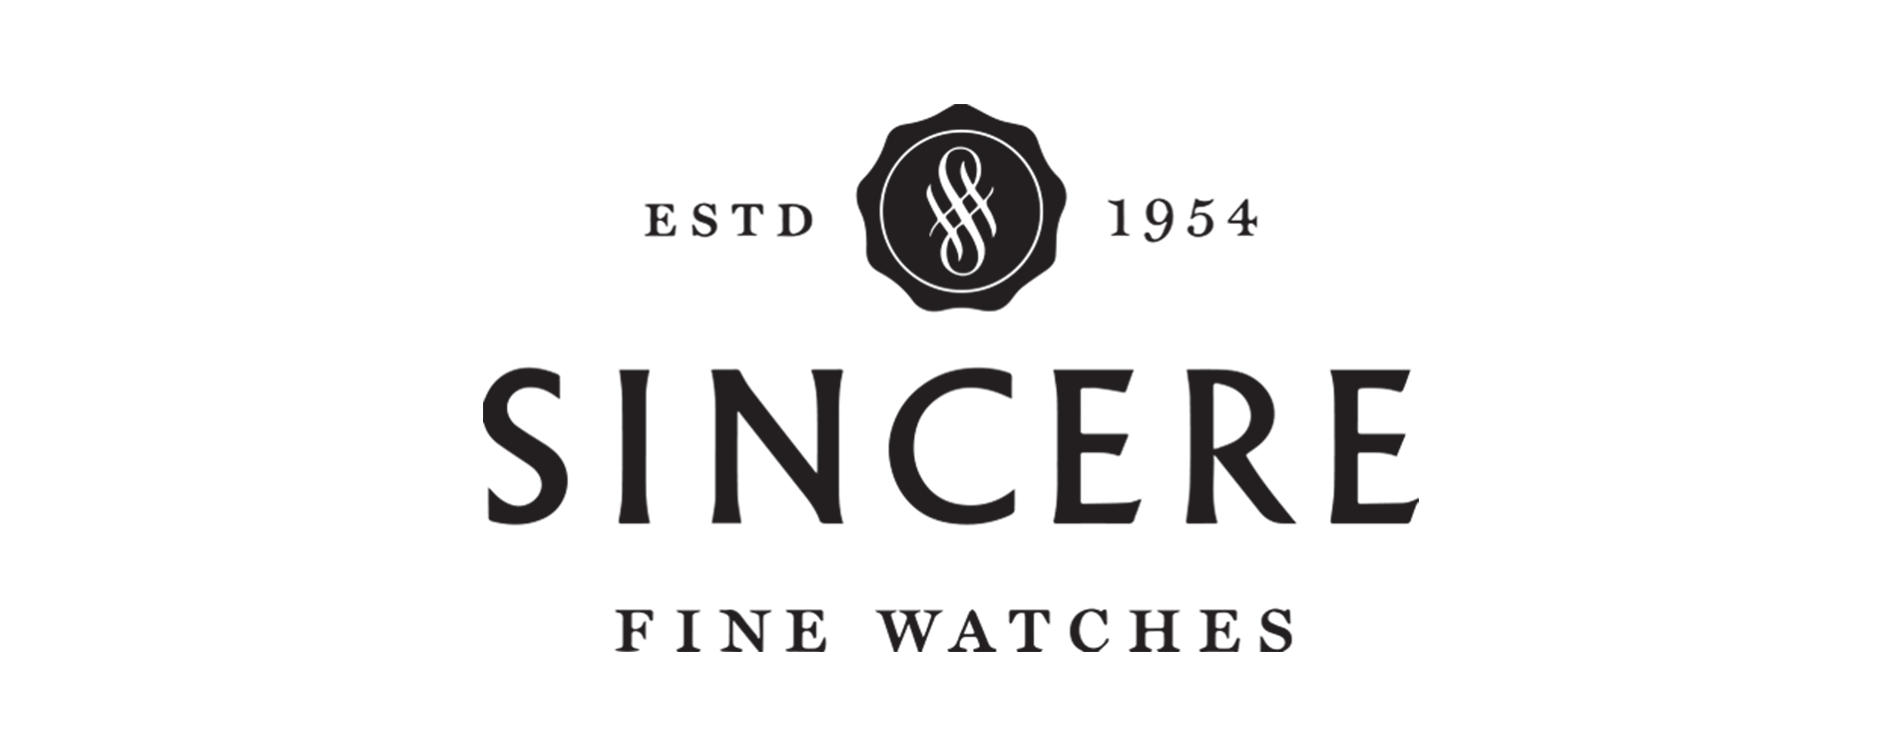 Search Sincere Watch in Watches | SINGPromos.com